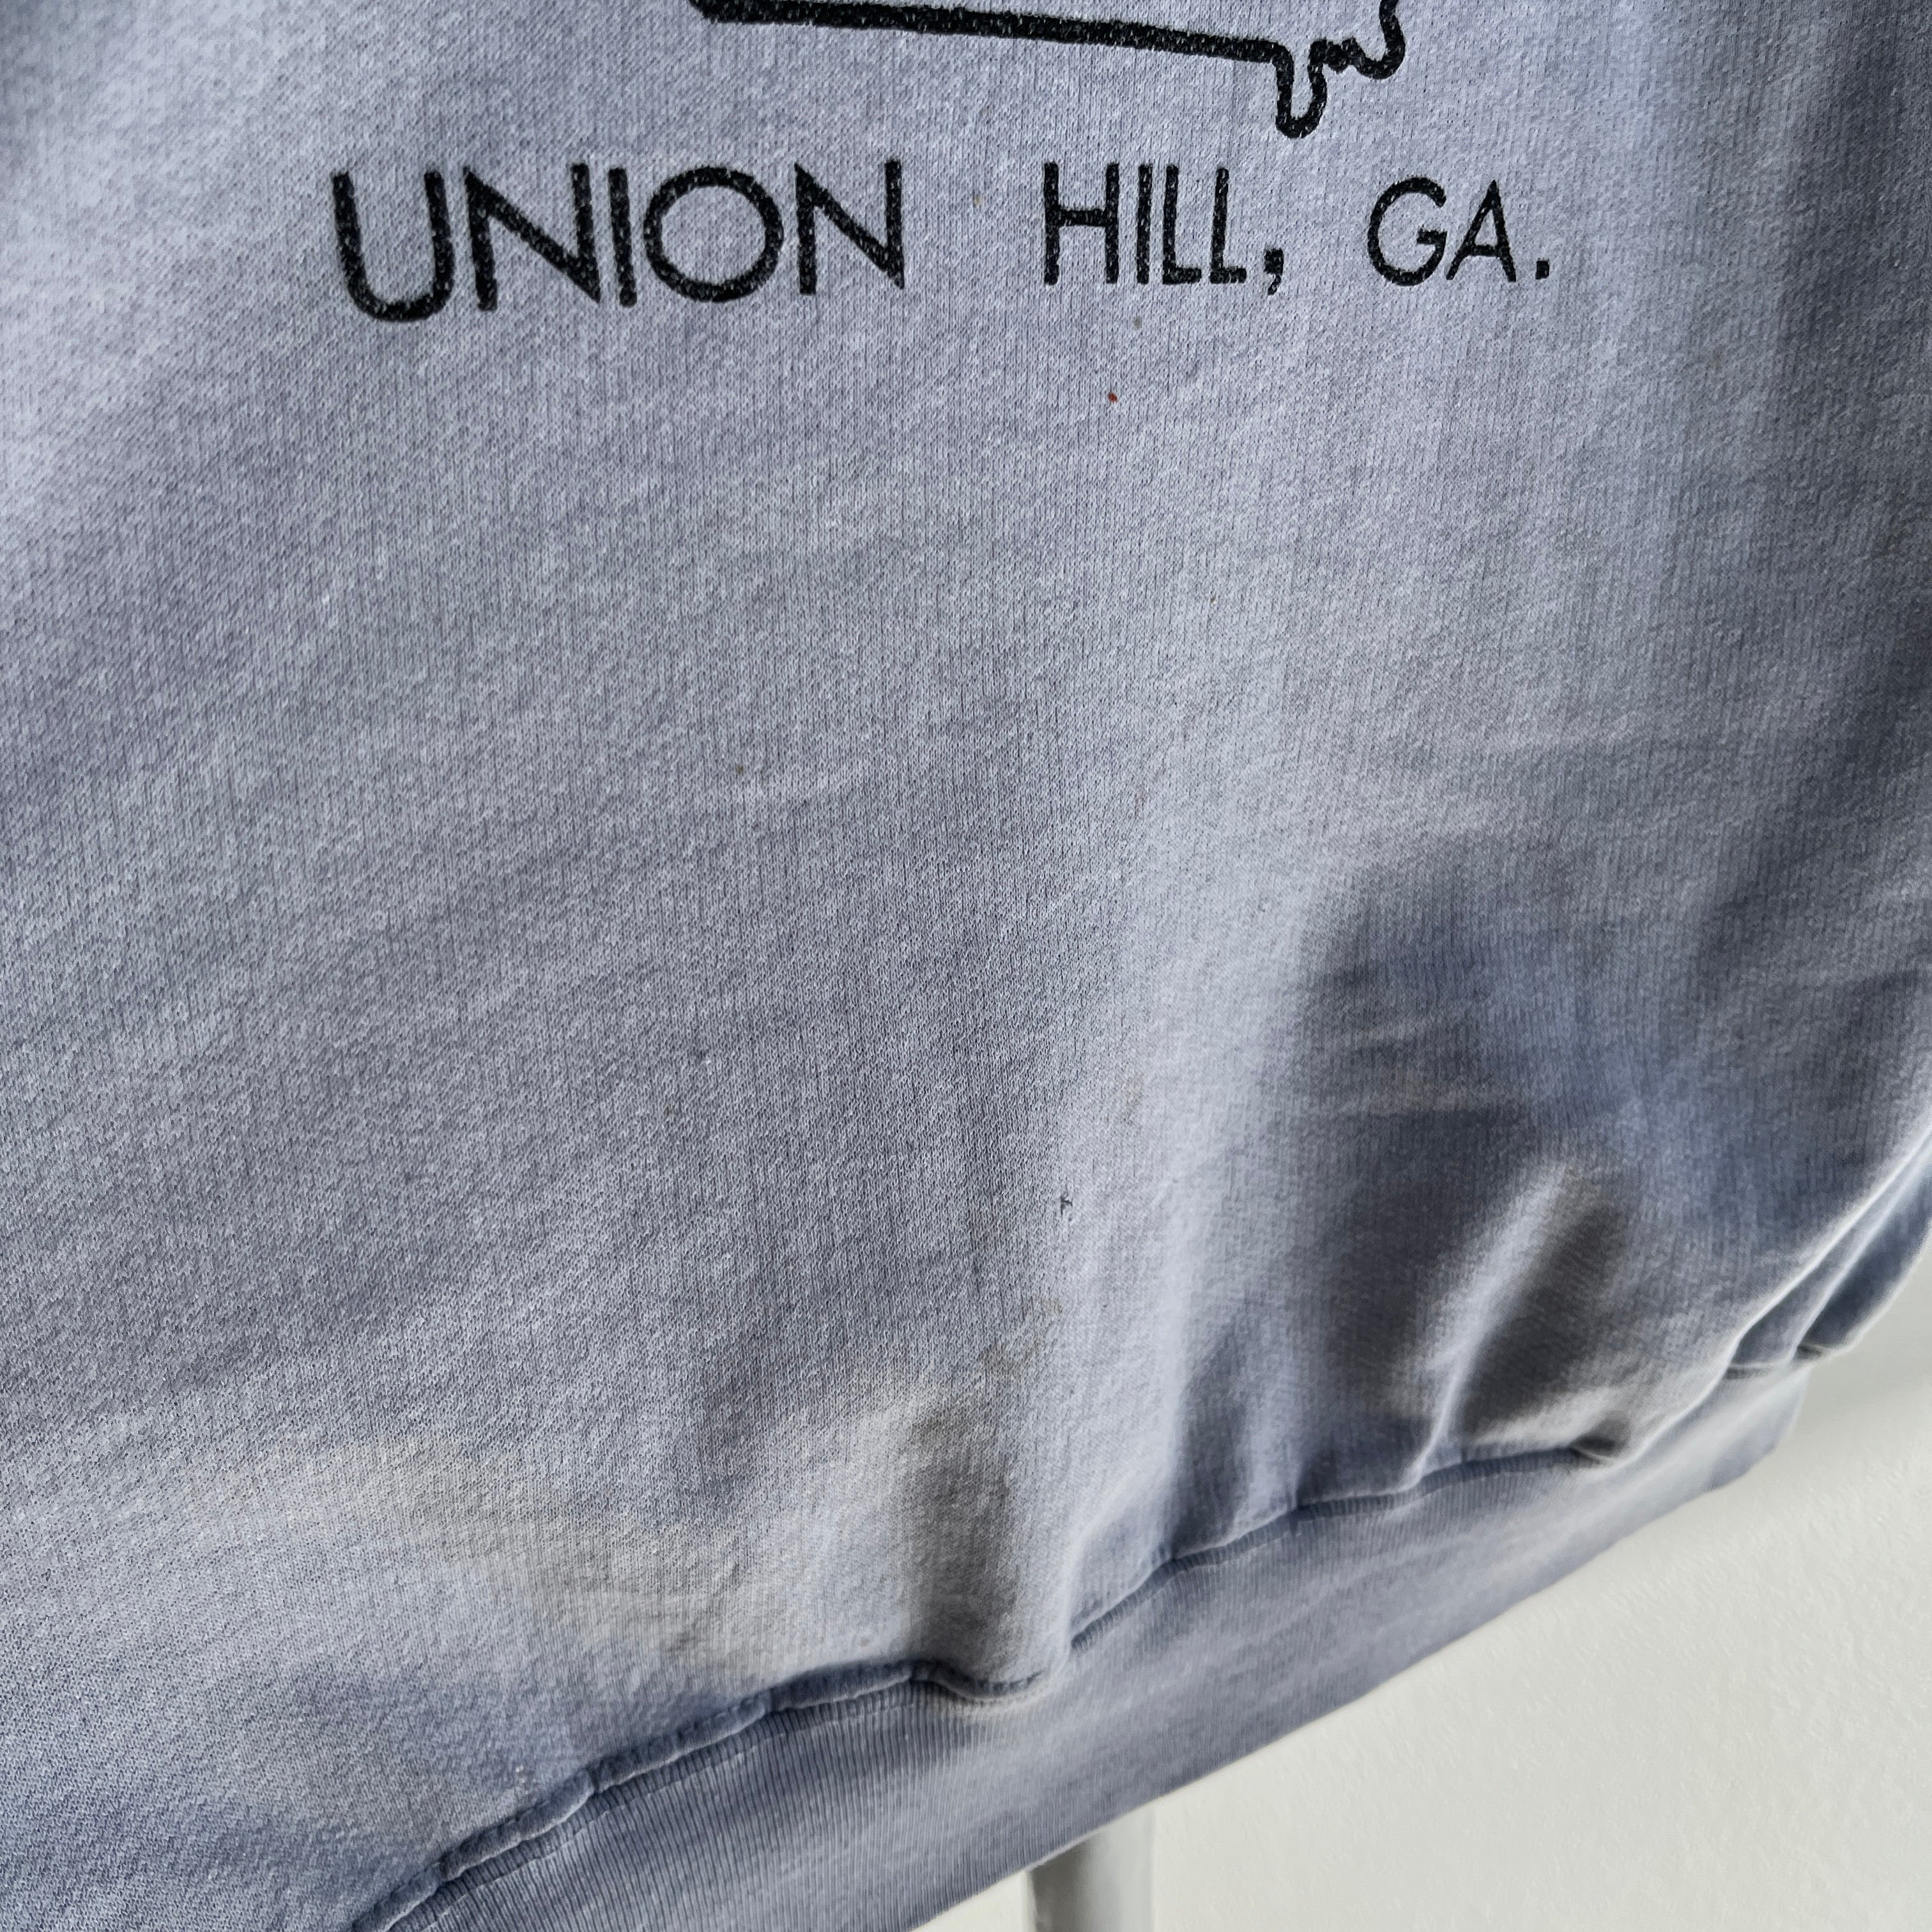 1980s I'd Rather Be in Union Hill, GA Sweatshirt